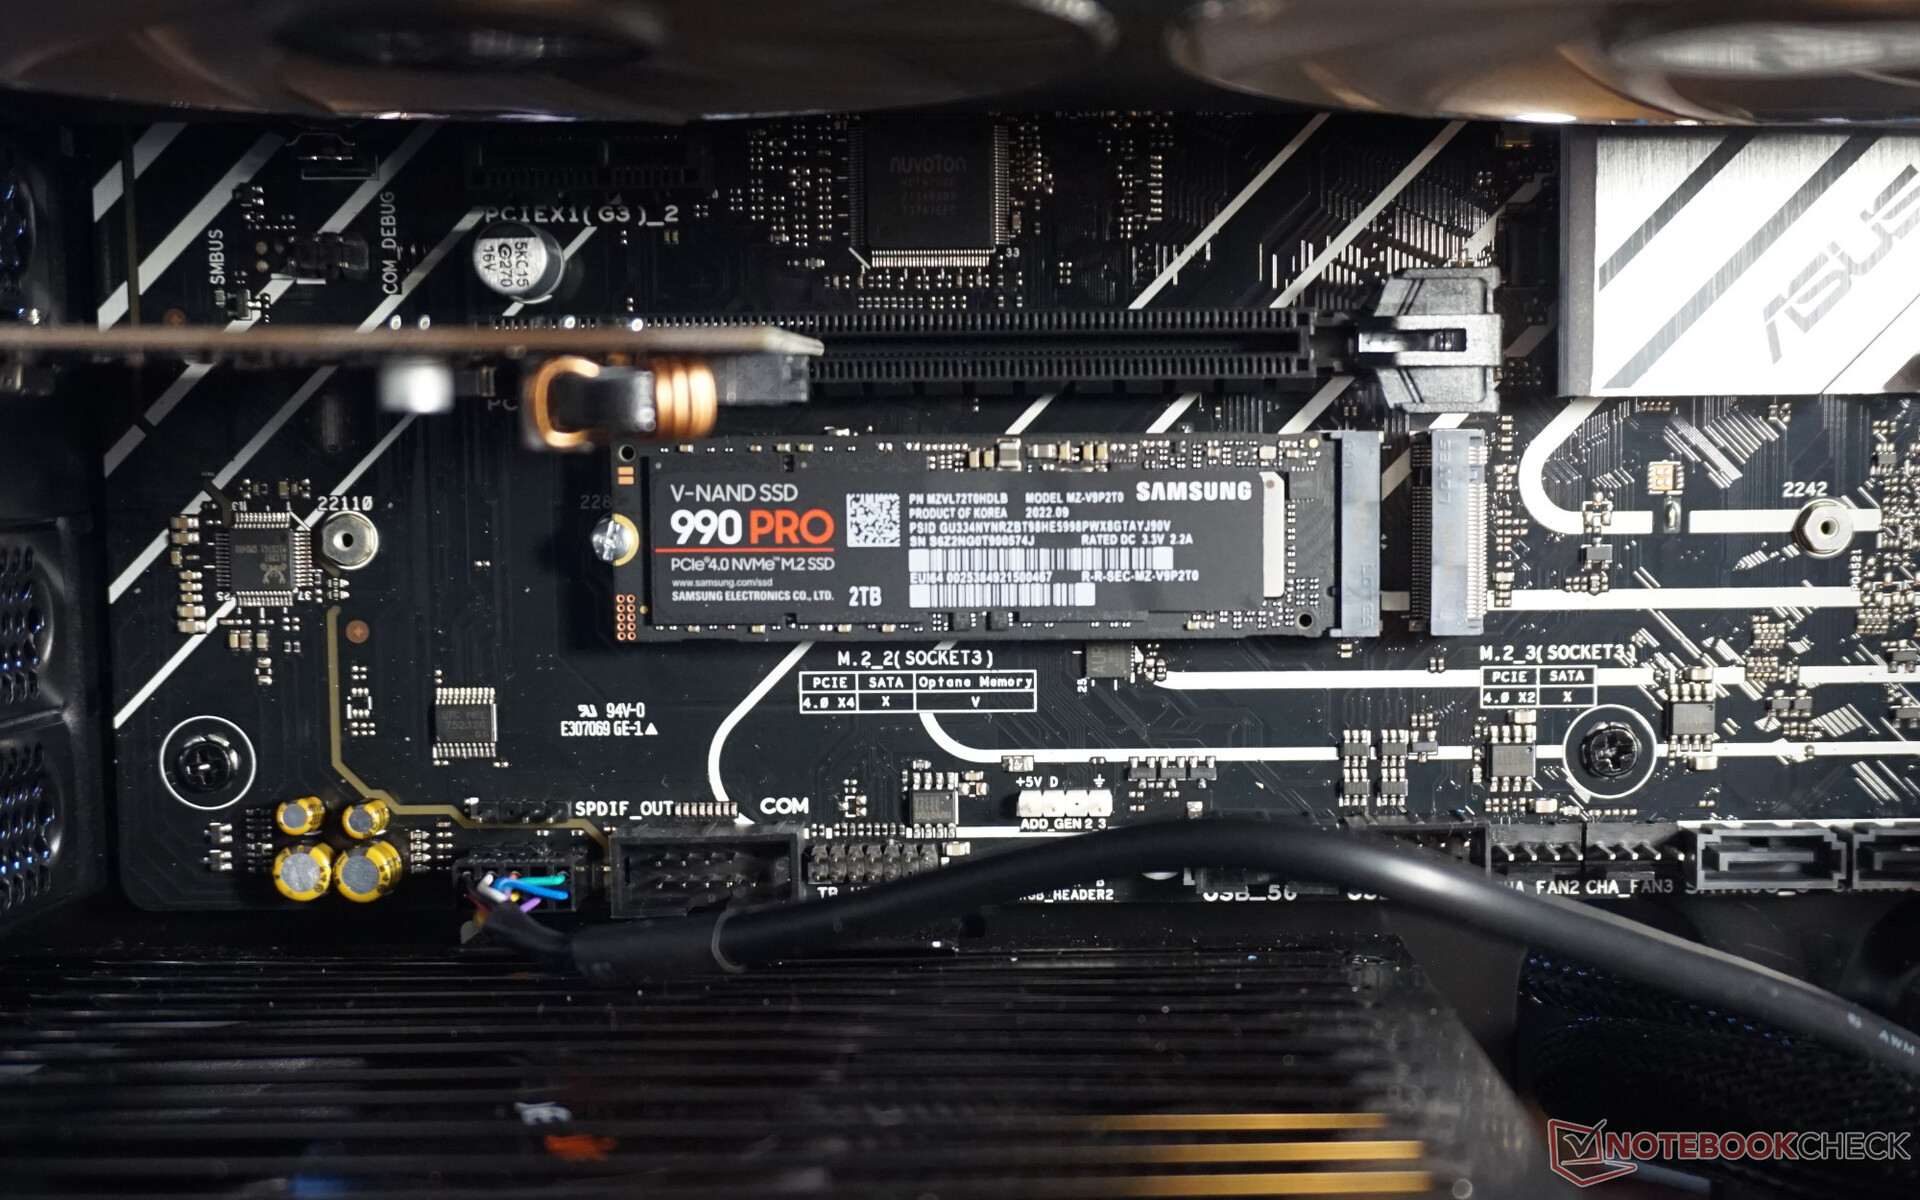 Review: Samsung 990 Pro – speeding in the fast lane